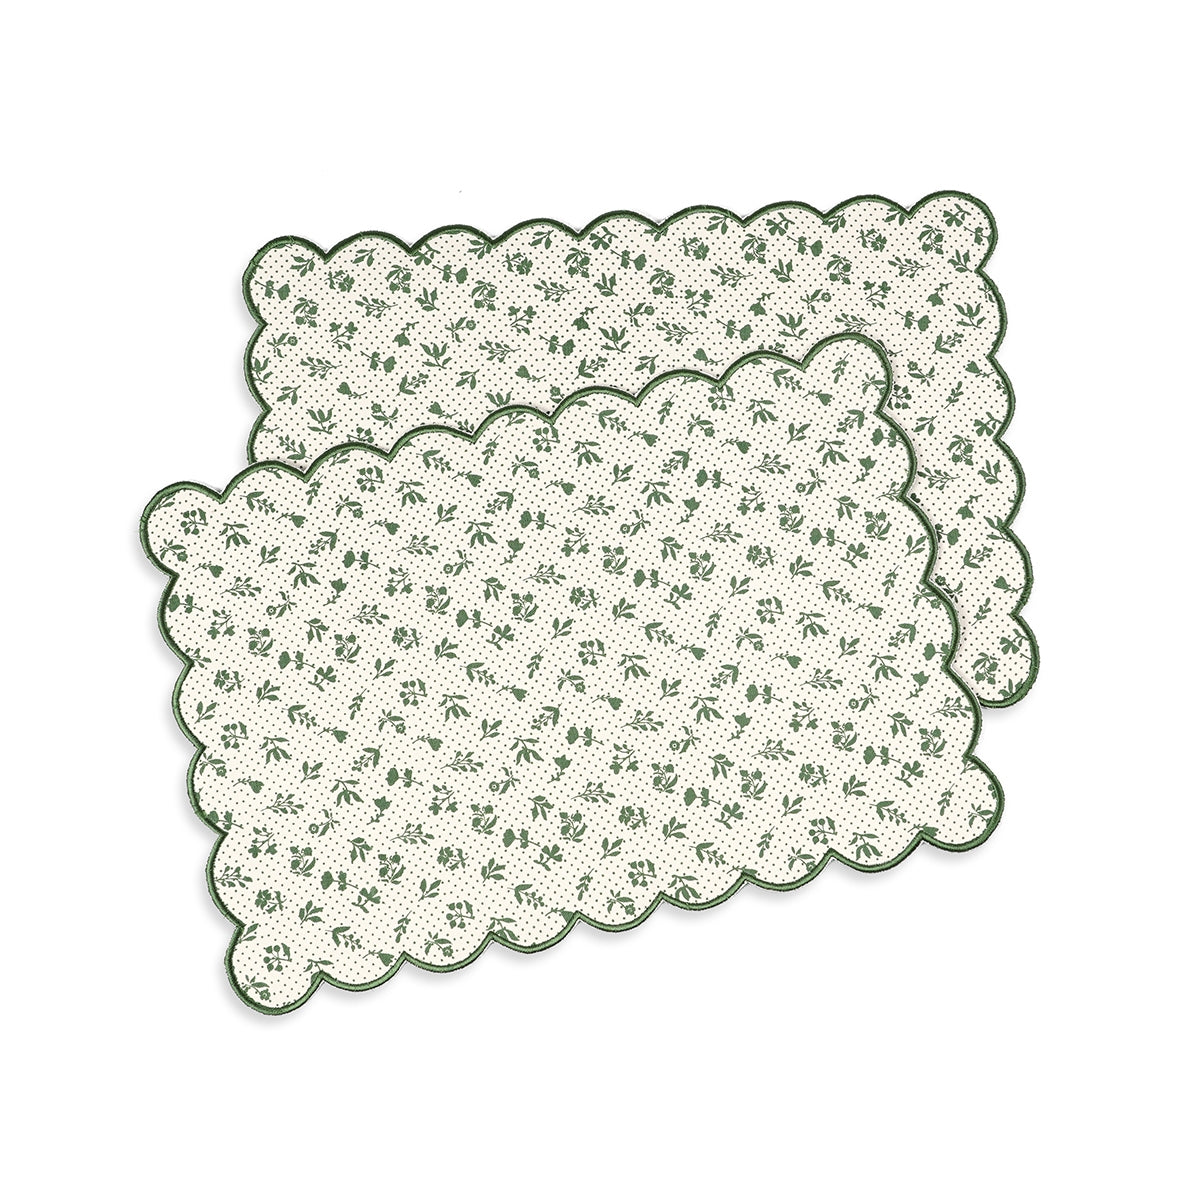 Green scalloped cotton Placemat with floral block print , 13X19 inches